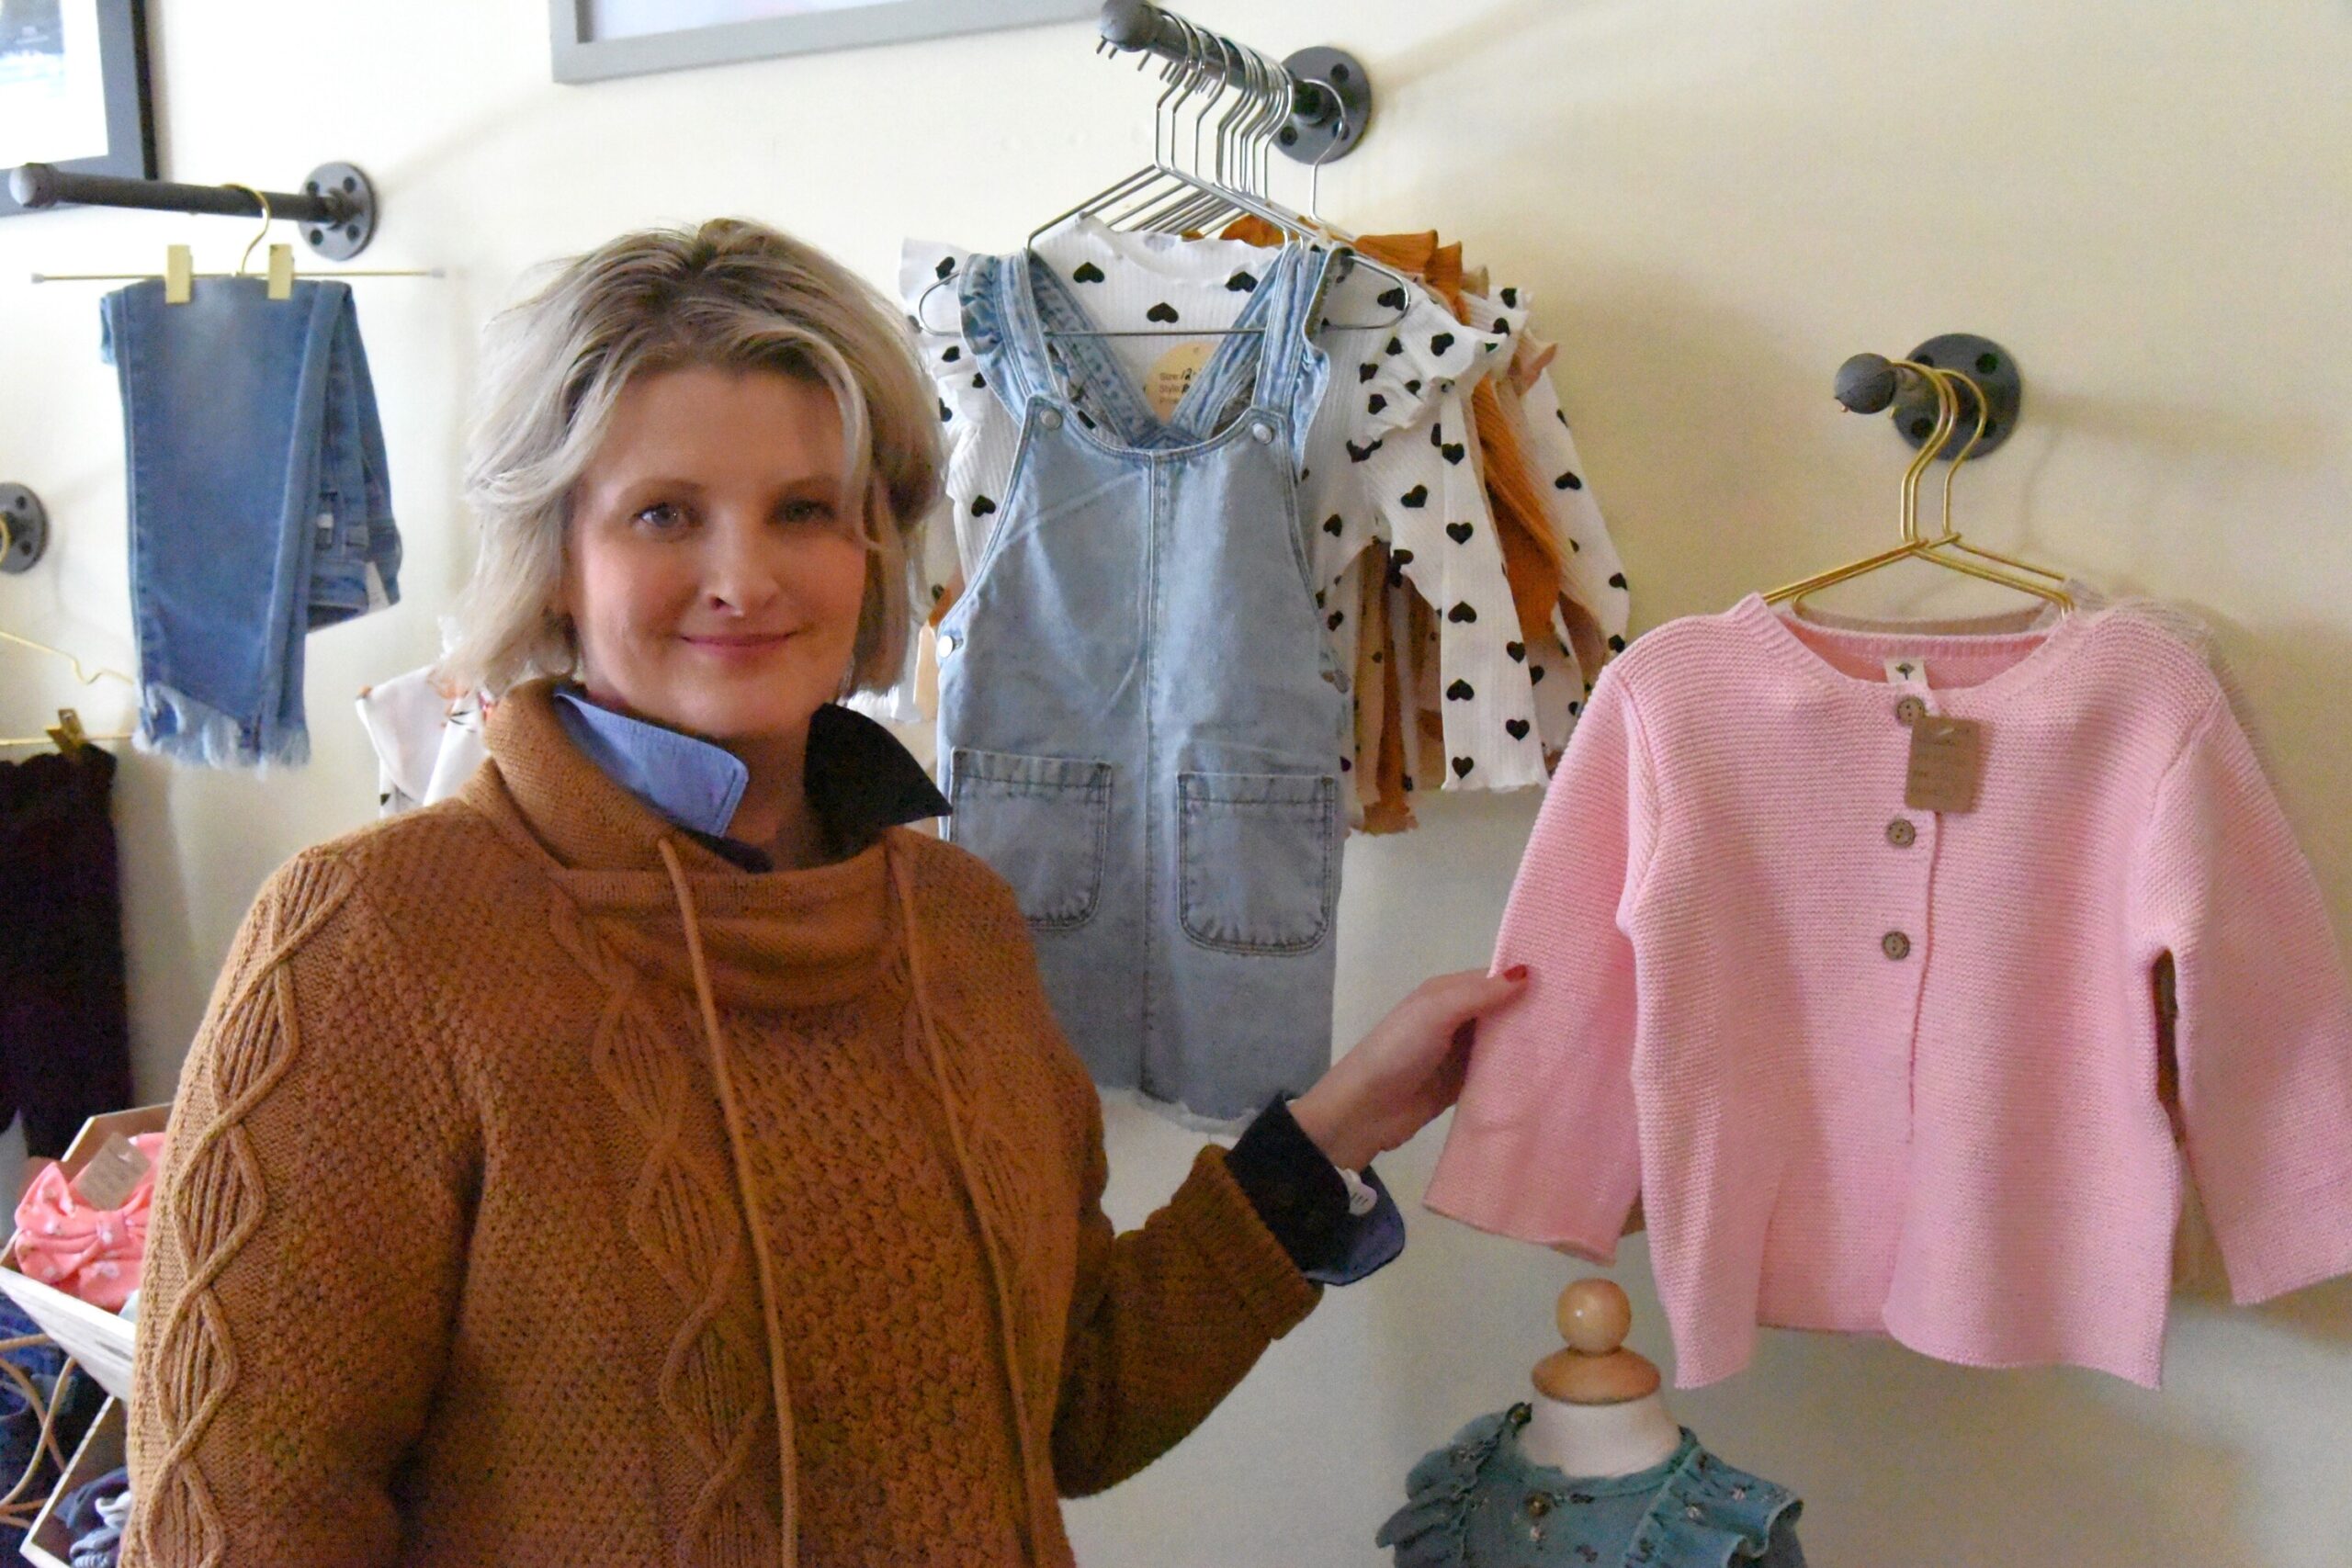 New women's clothing shop opens in Presque Isle - The County